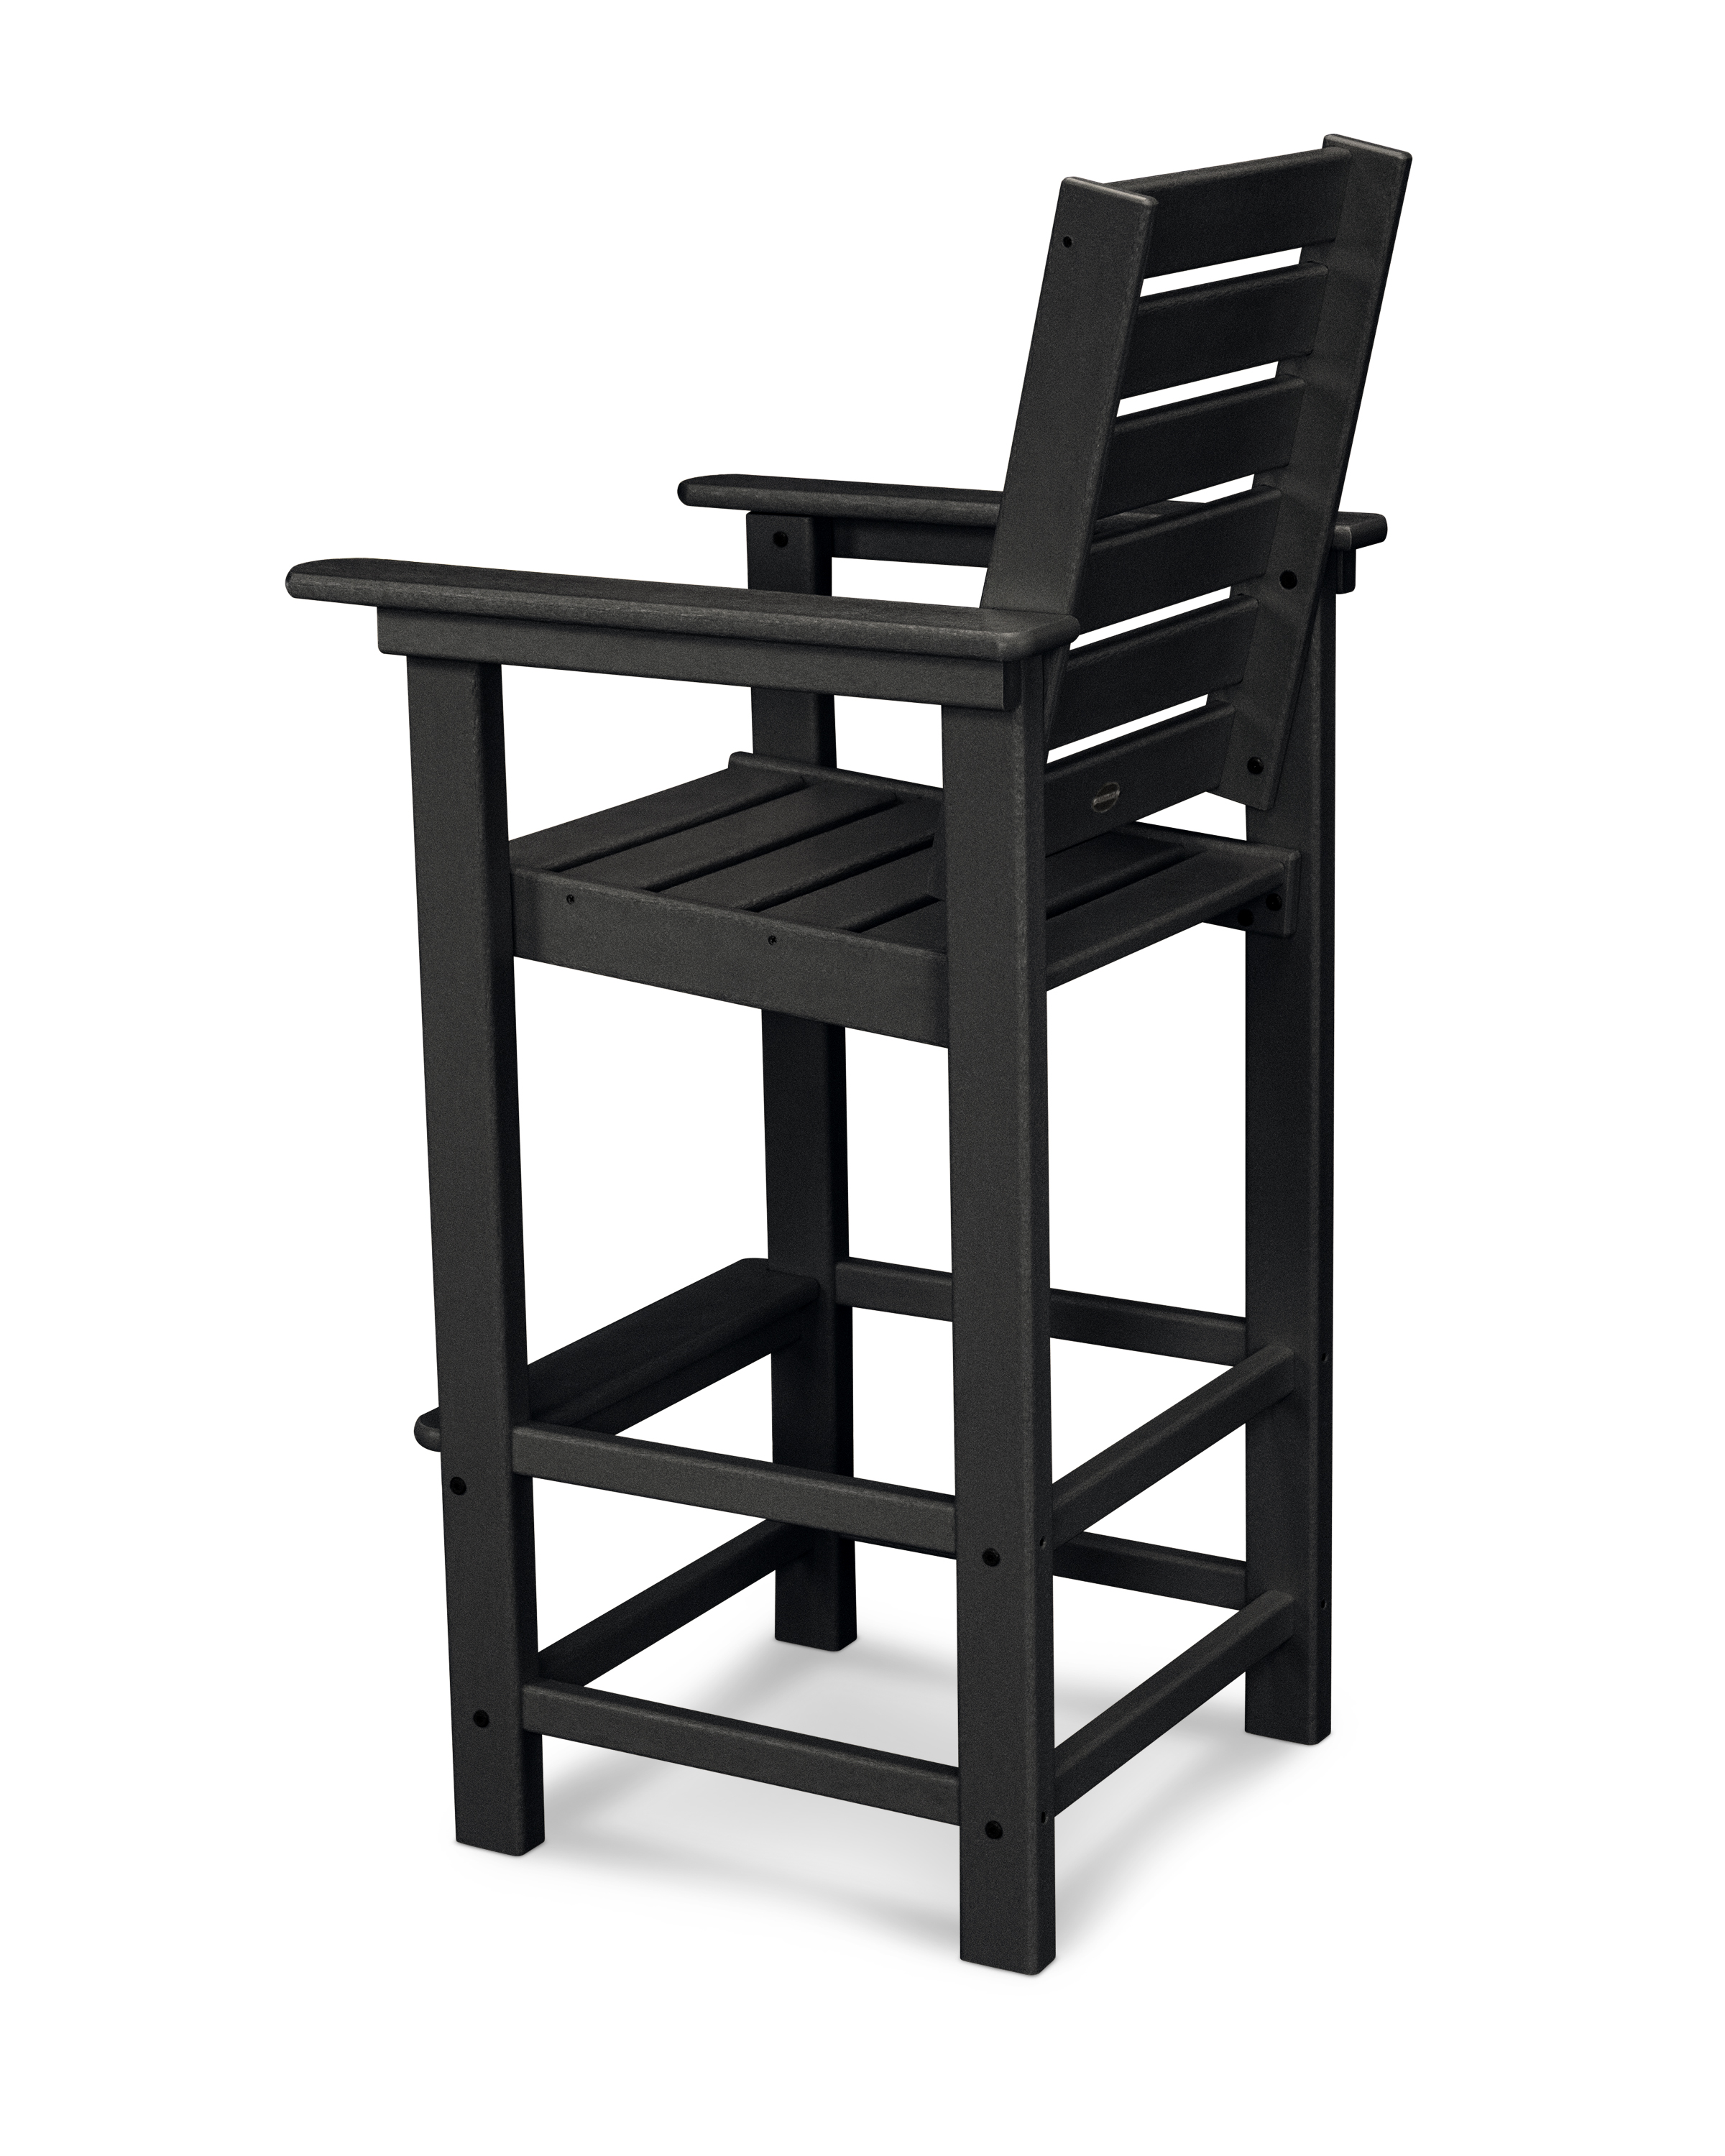 By Itself Or Paired With One Of Our Bar Height Tables, This Tall Chair Adds Contemporary Style To Any Outdoor Entertainment Area. Polywood Furniture Is Constructed Of Solid Polywood Lumber That